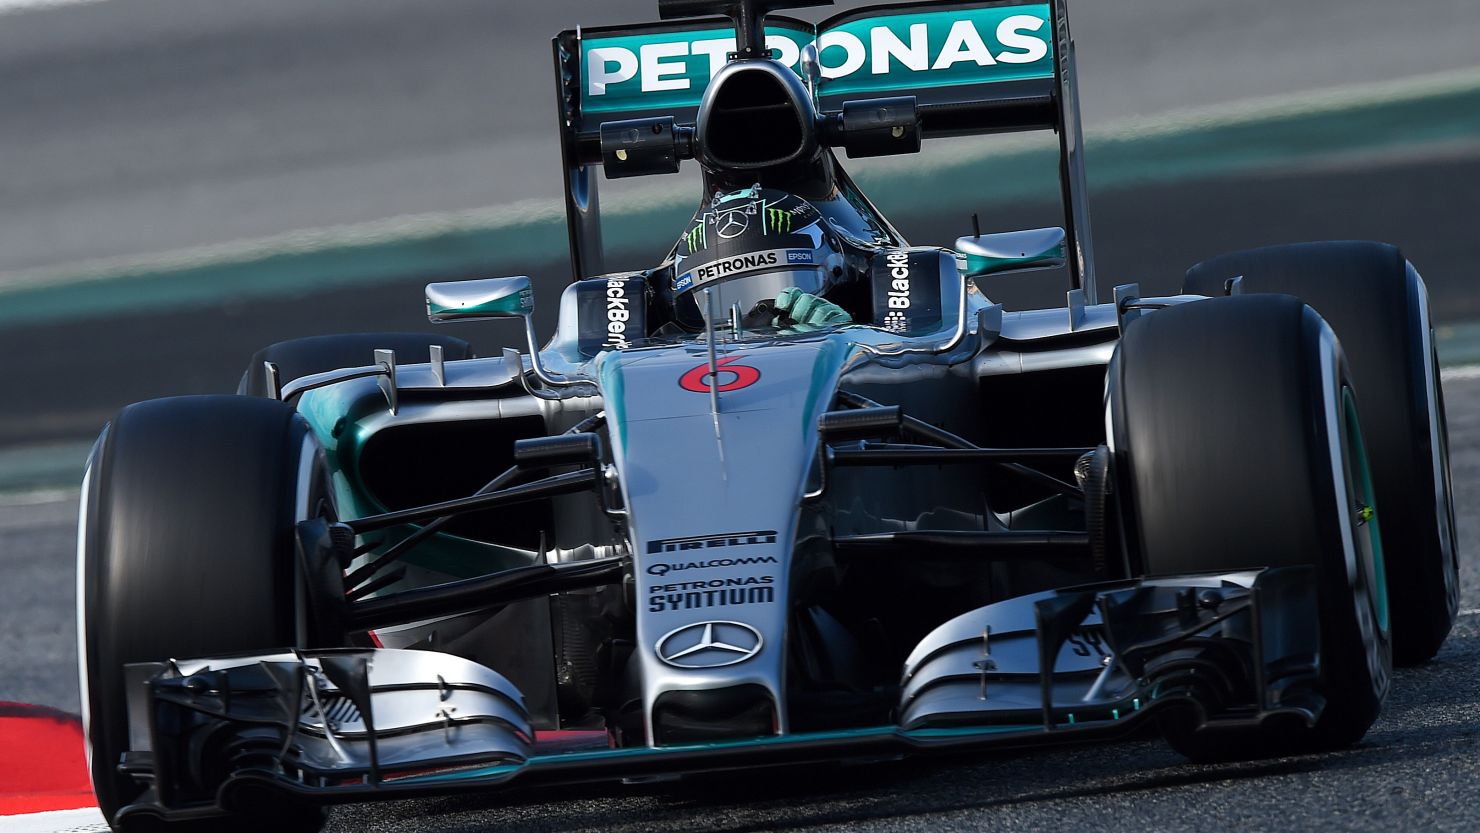 Nico Rosberg left his rivals trailing for Mercedes on the second day of F1 testing in Barcelona. 